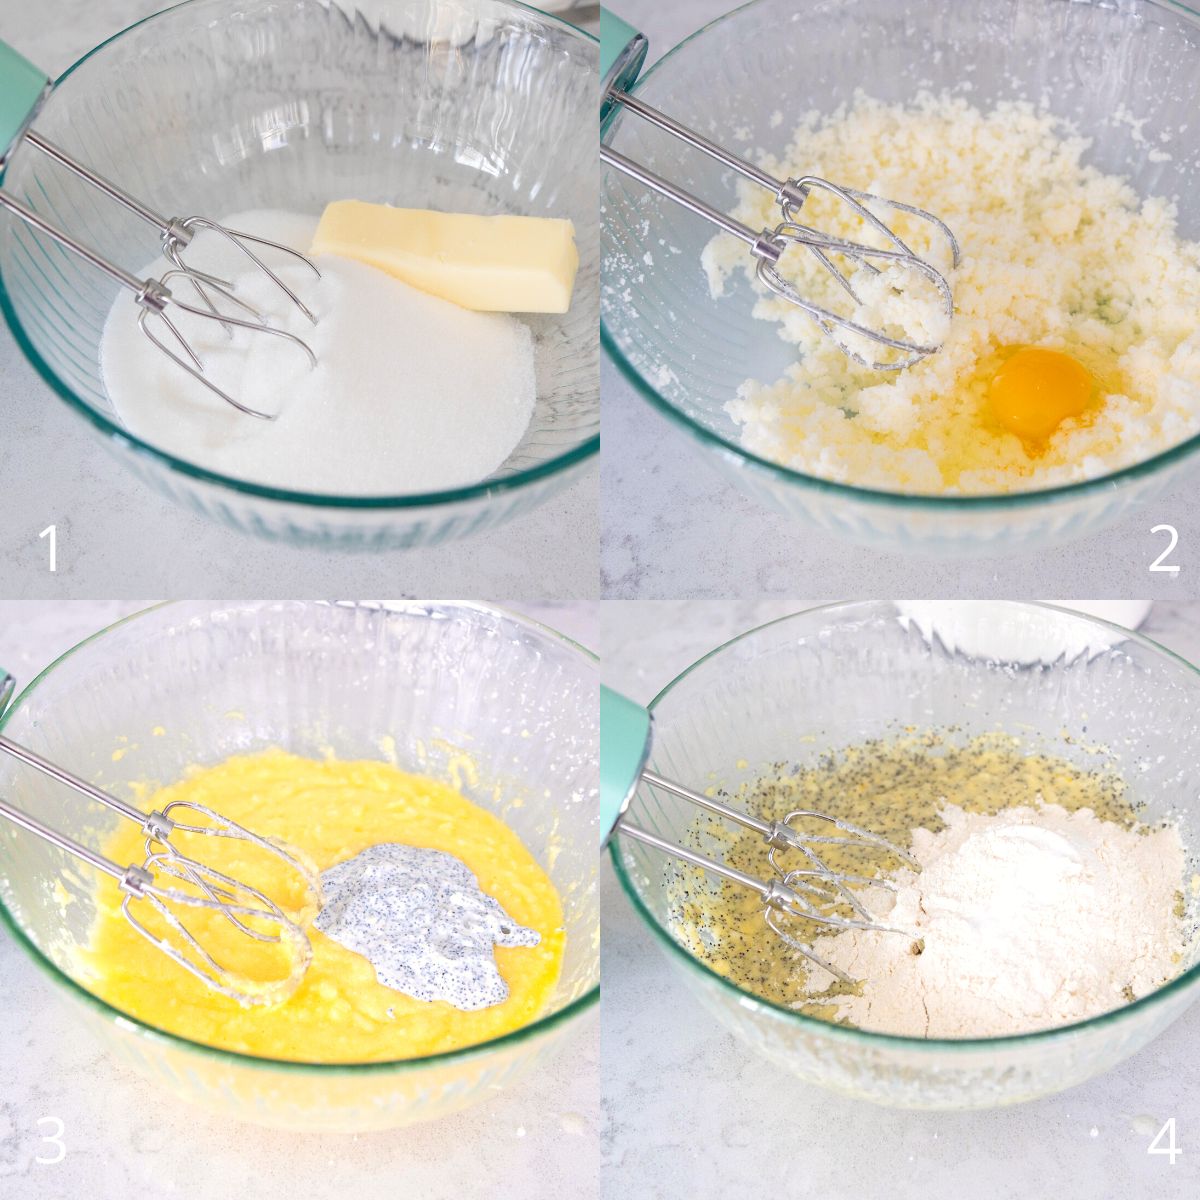 The step by step photos show how to cream the butter and sugar in a mixing bowl, add the egg, and then layer the sour cream mixture with the dry flour mixture to form the batter.